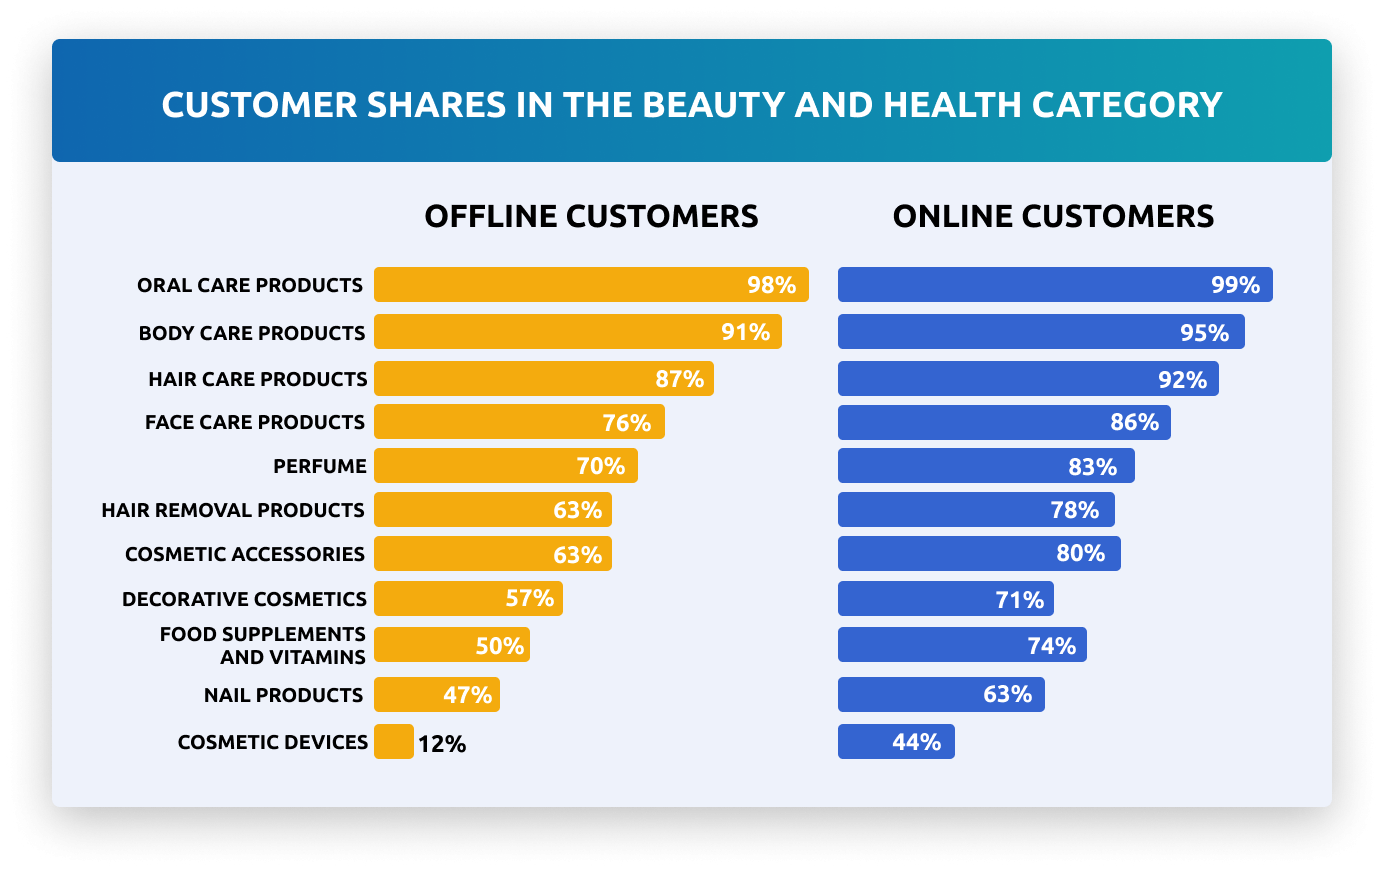 Online Influence on Beauty Product Purchases in Russia